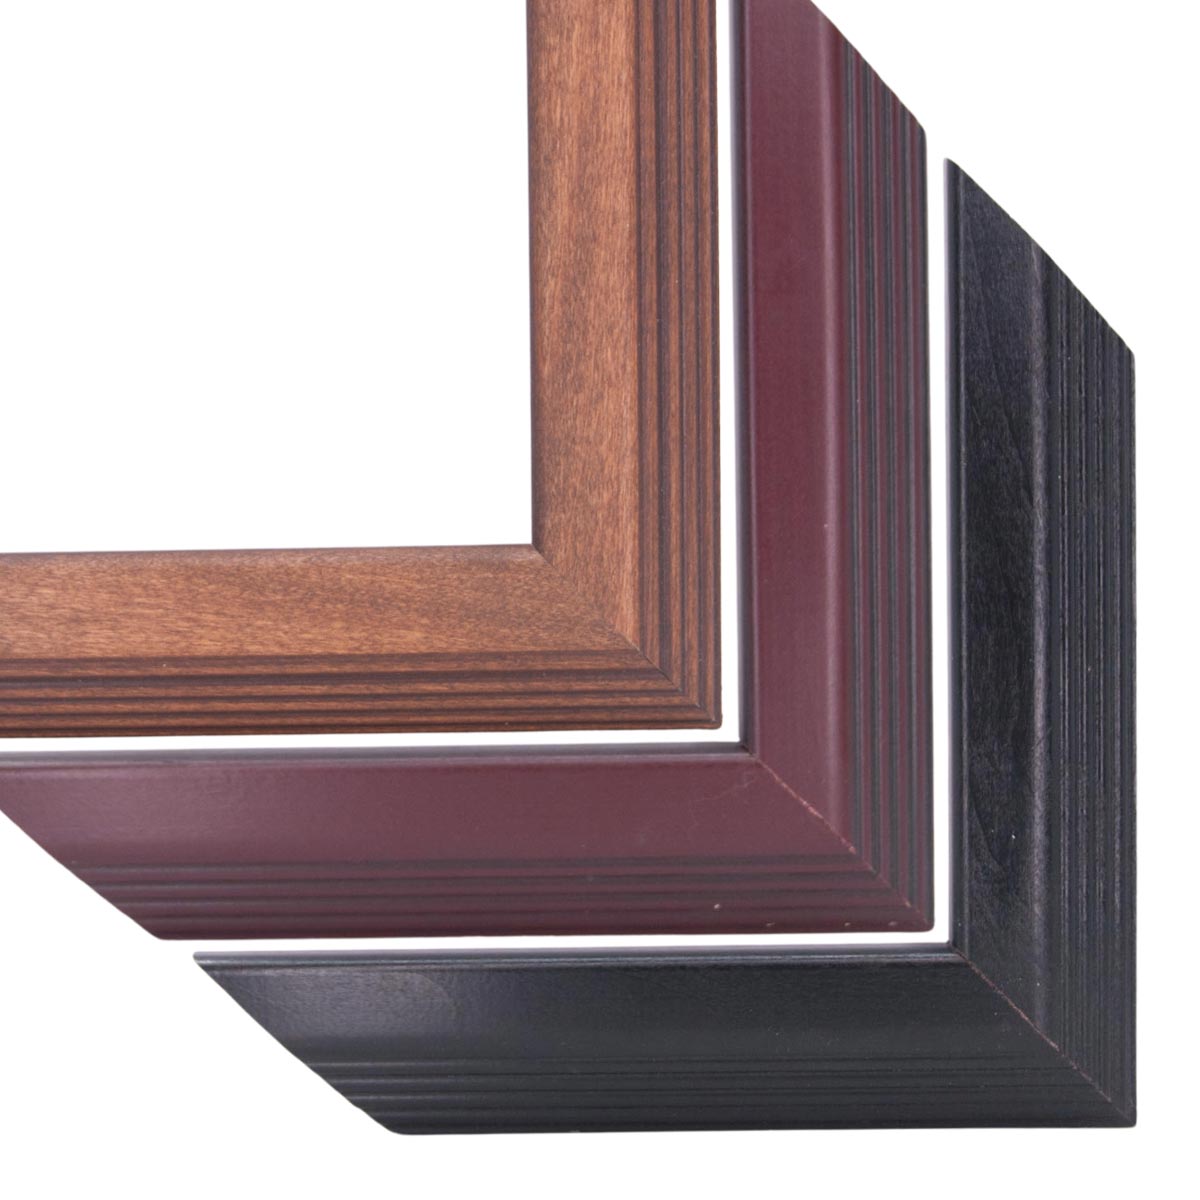 Domestic Frames M100-1-1/2 inches